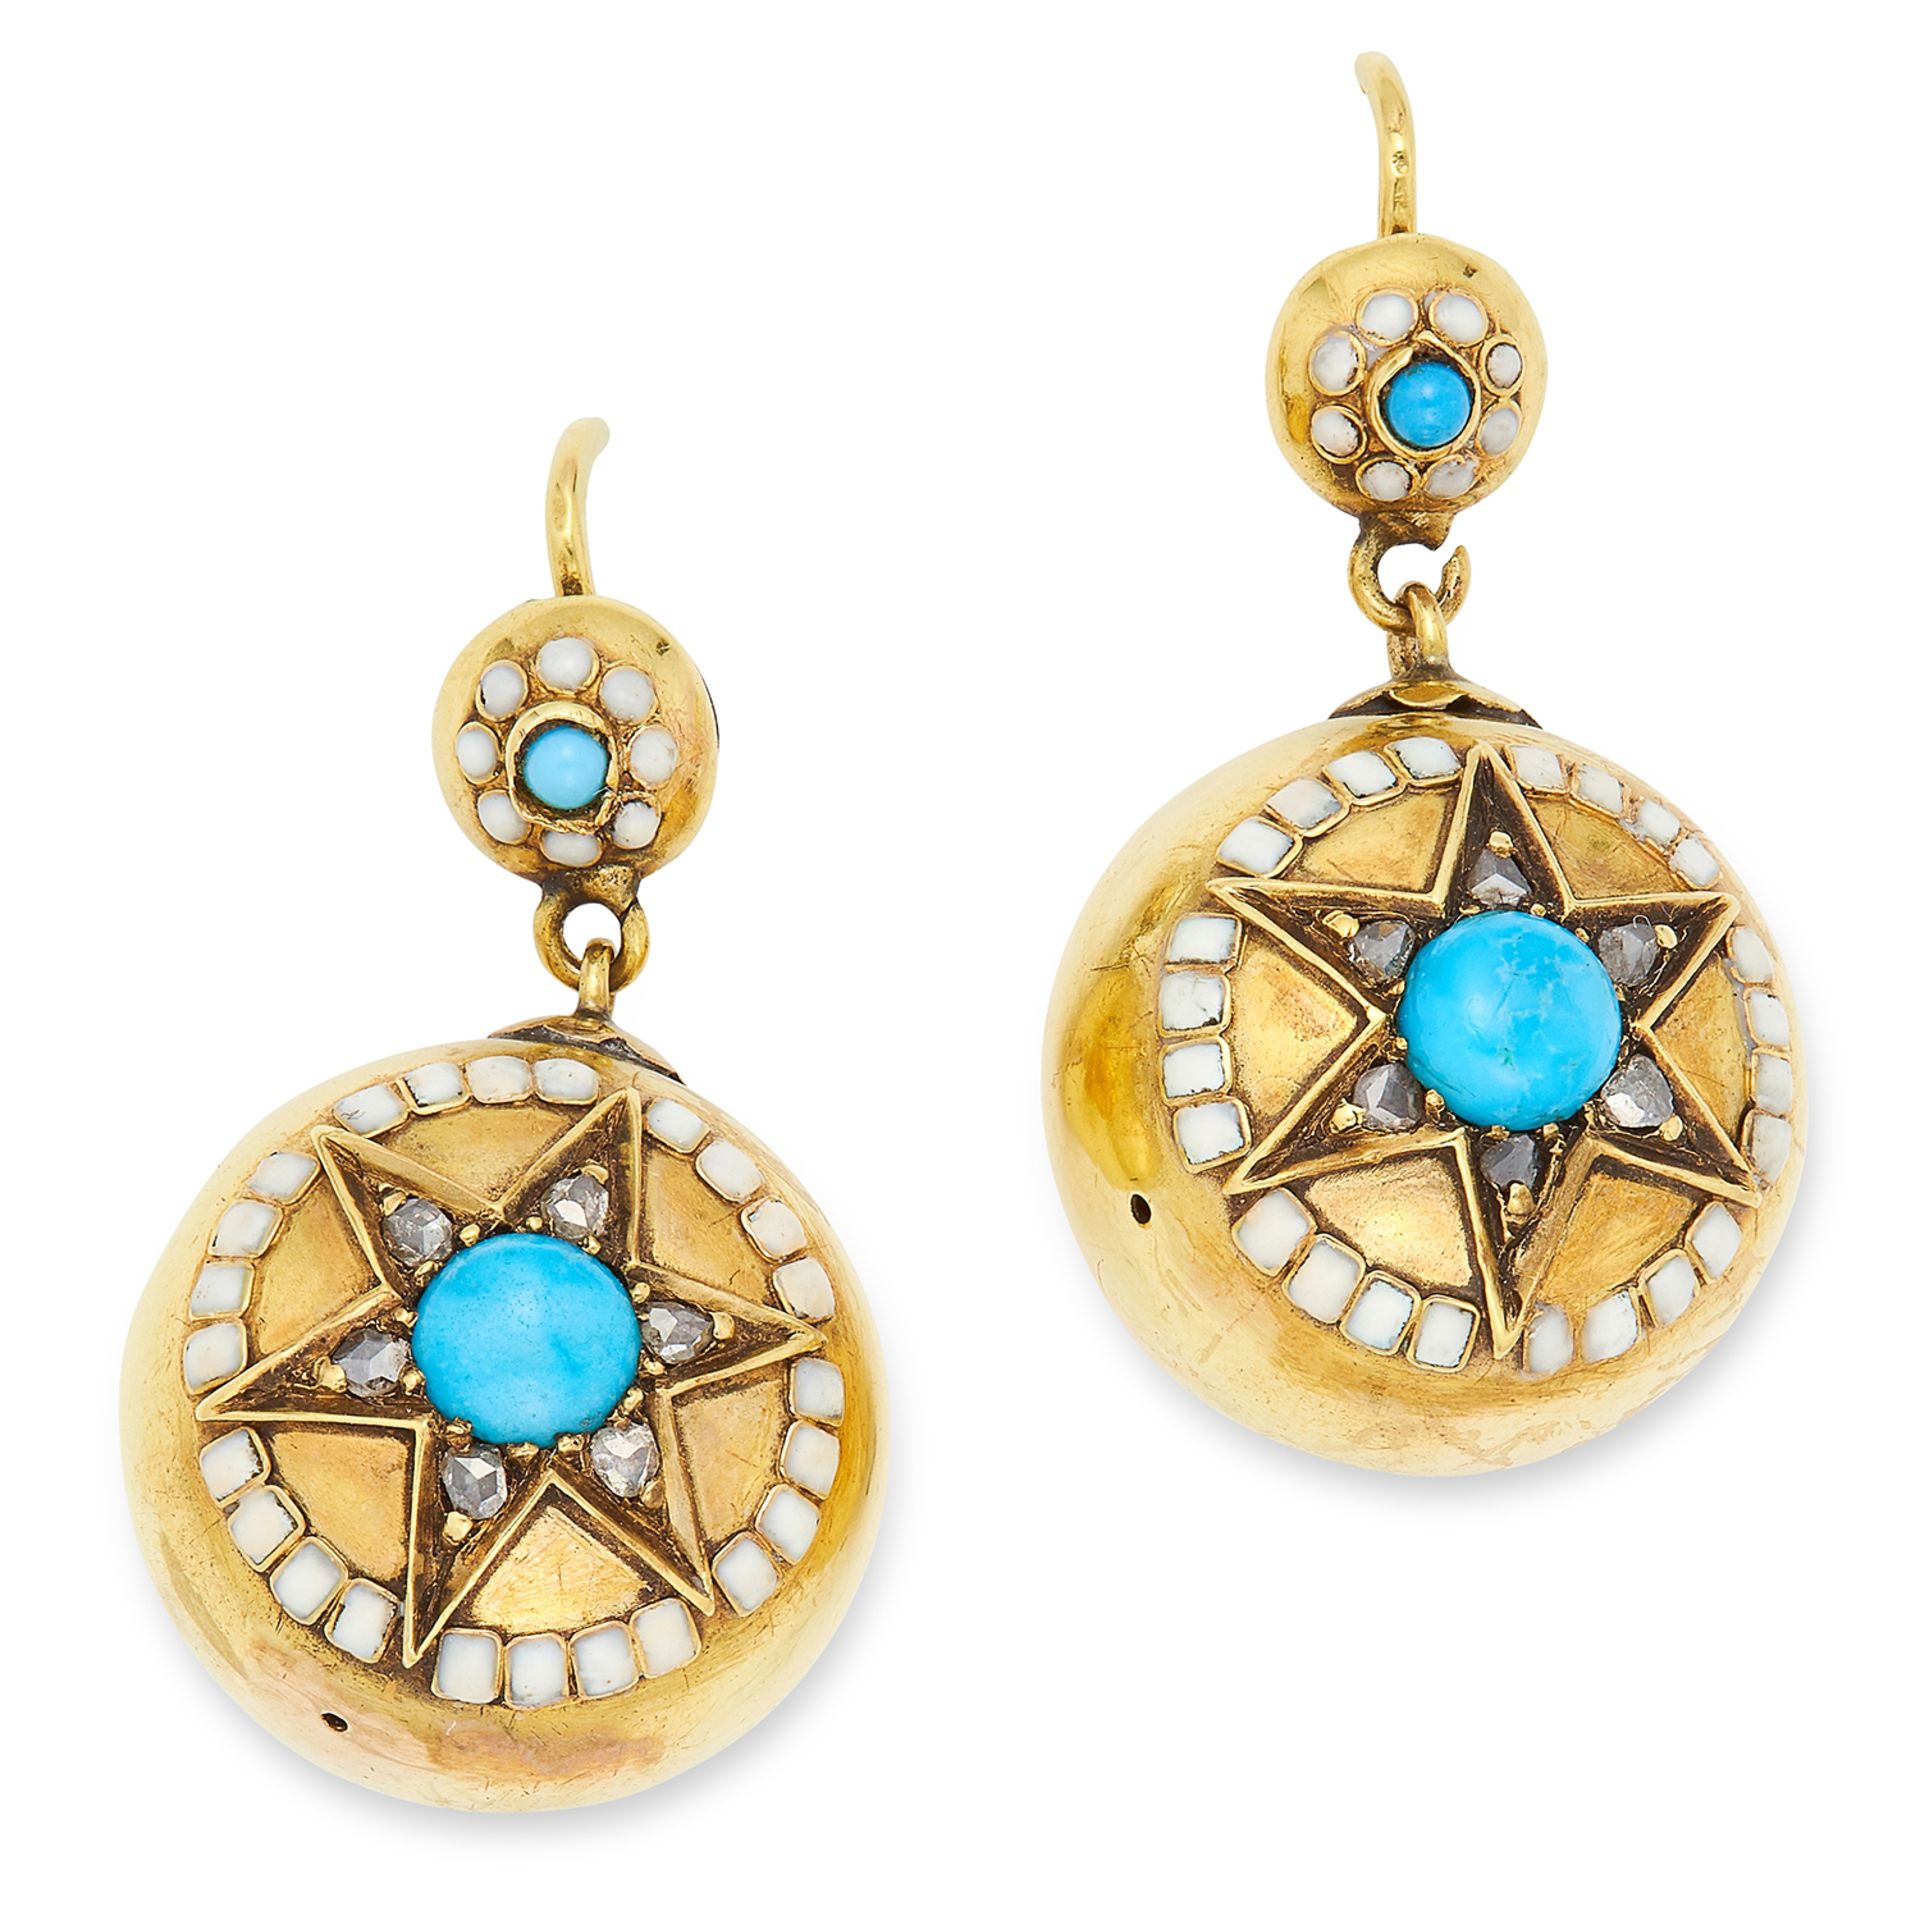 ANTIQUE TURQUOISE, ENAMEL AND DIAMOND EARRINGS, set with cabochon turquoise, white enamel and